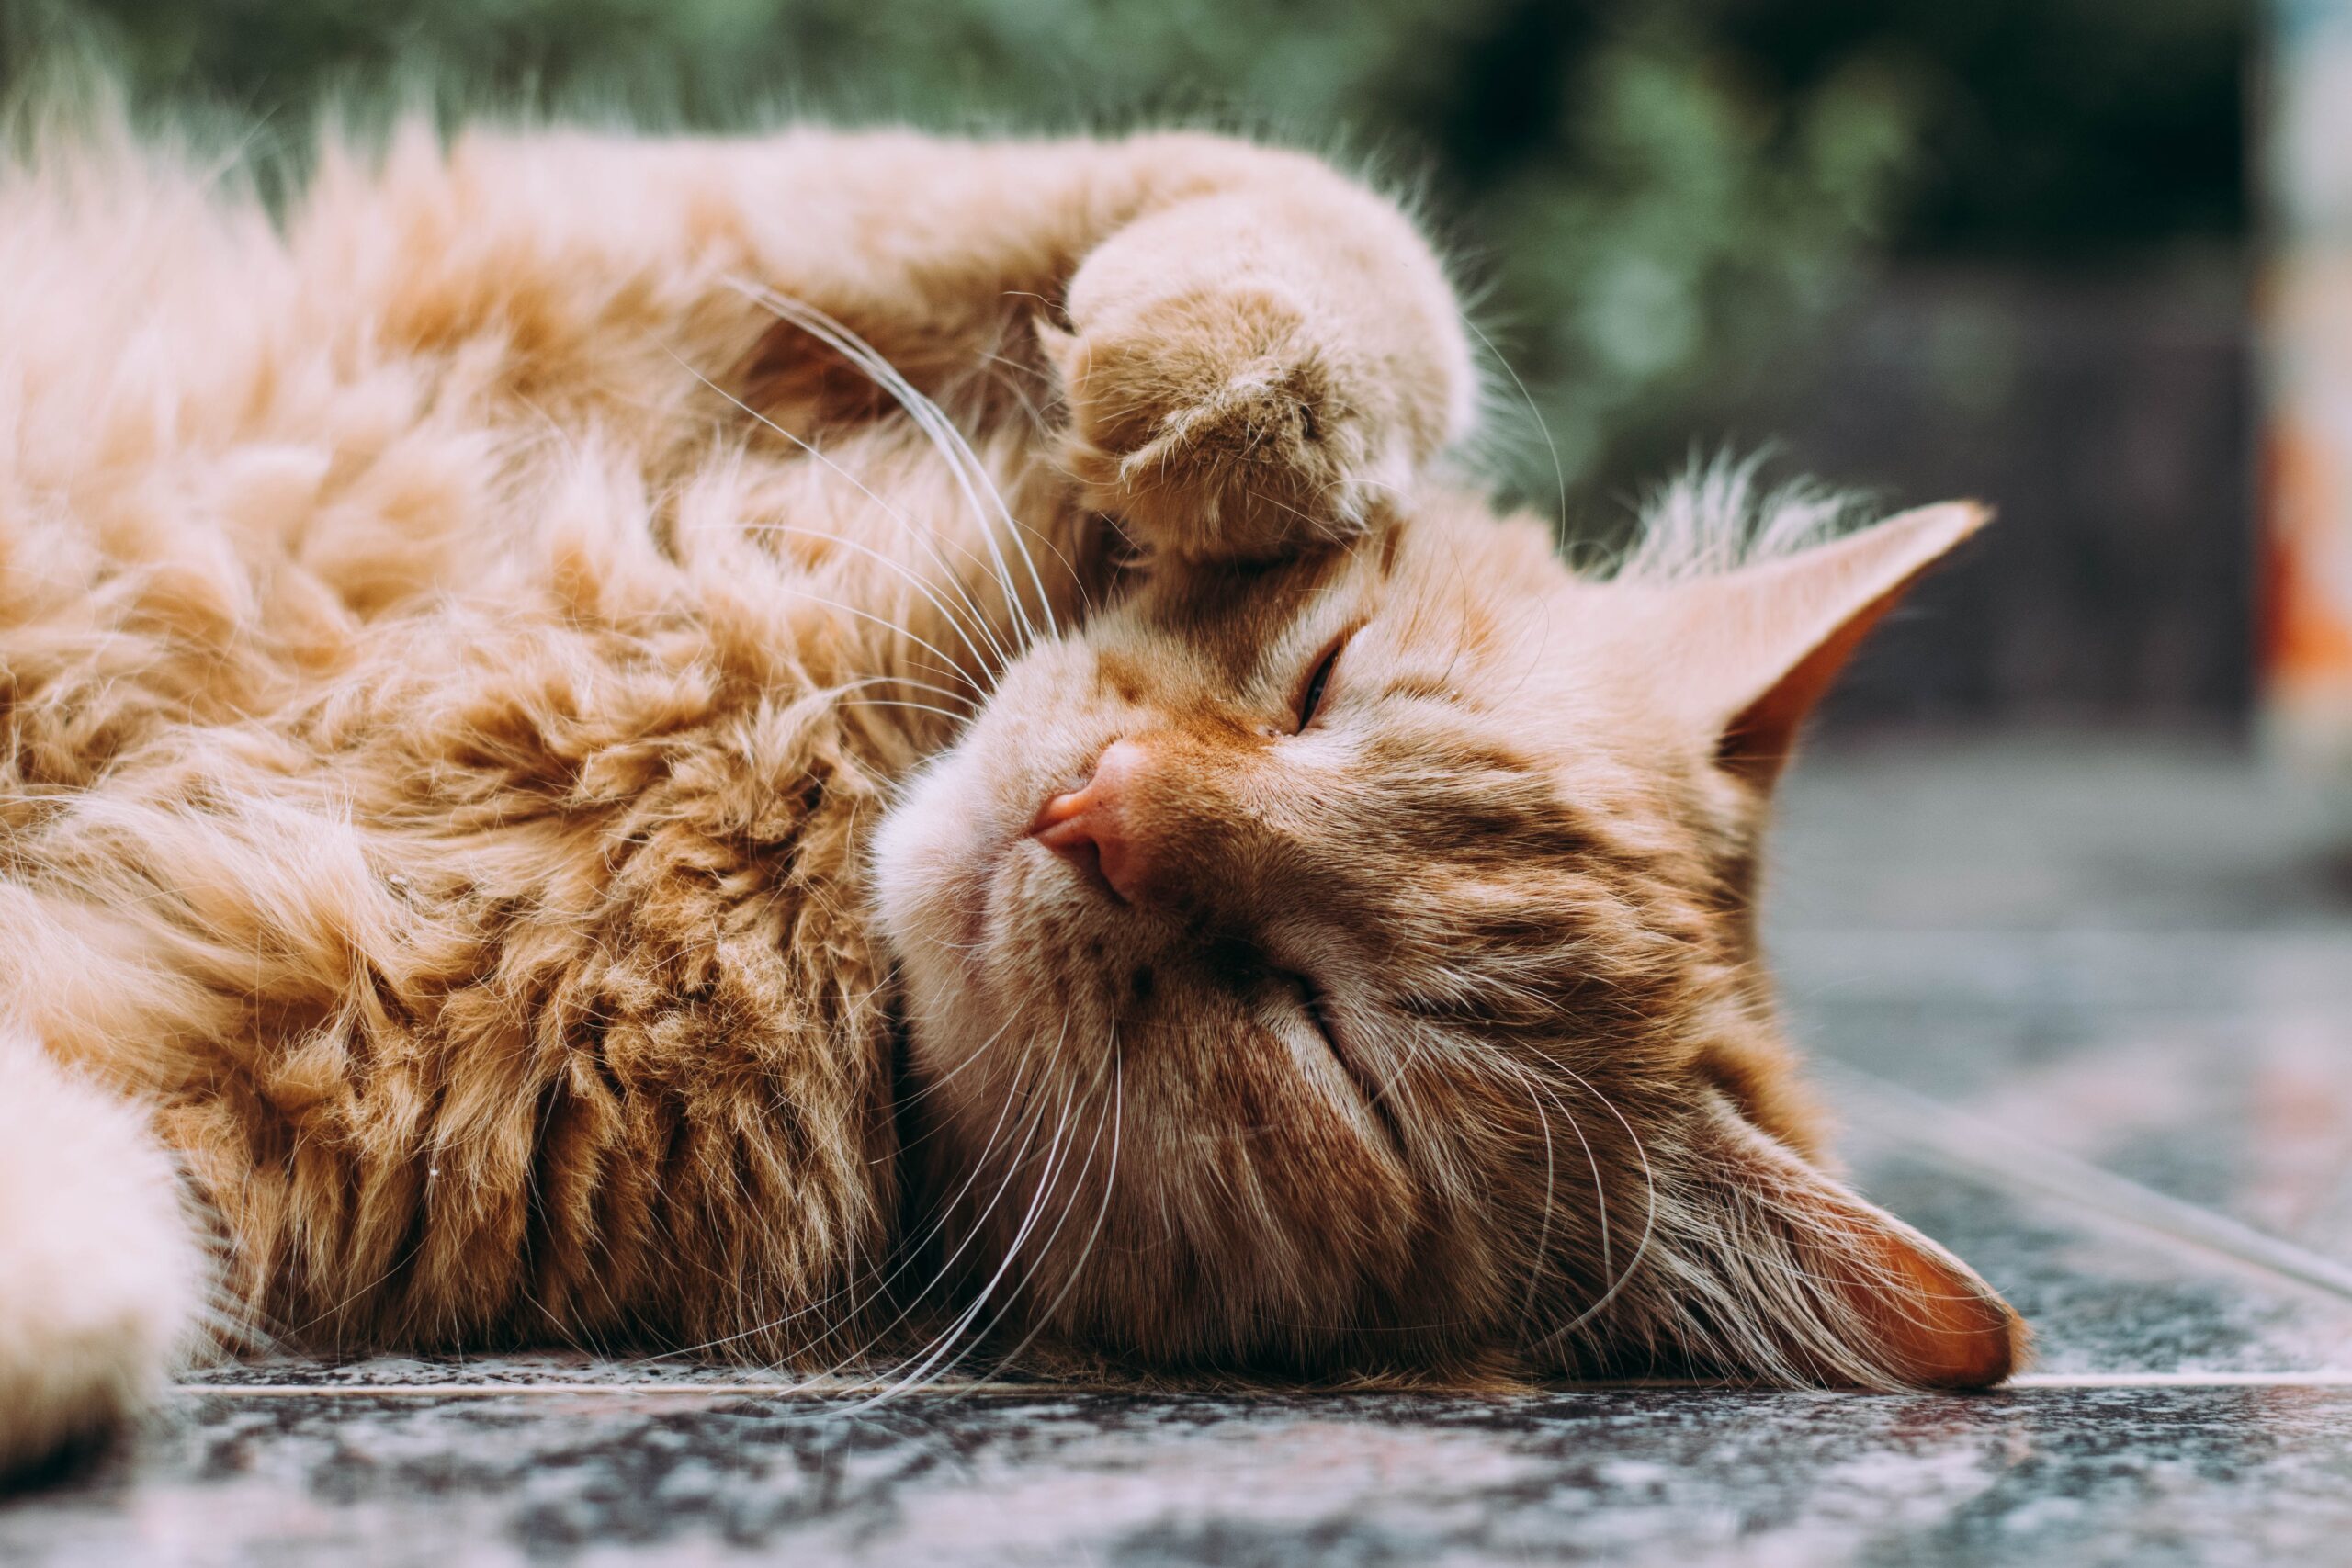 Why cats sleep so much - What Should You Know